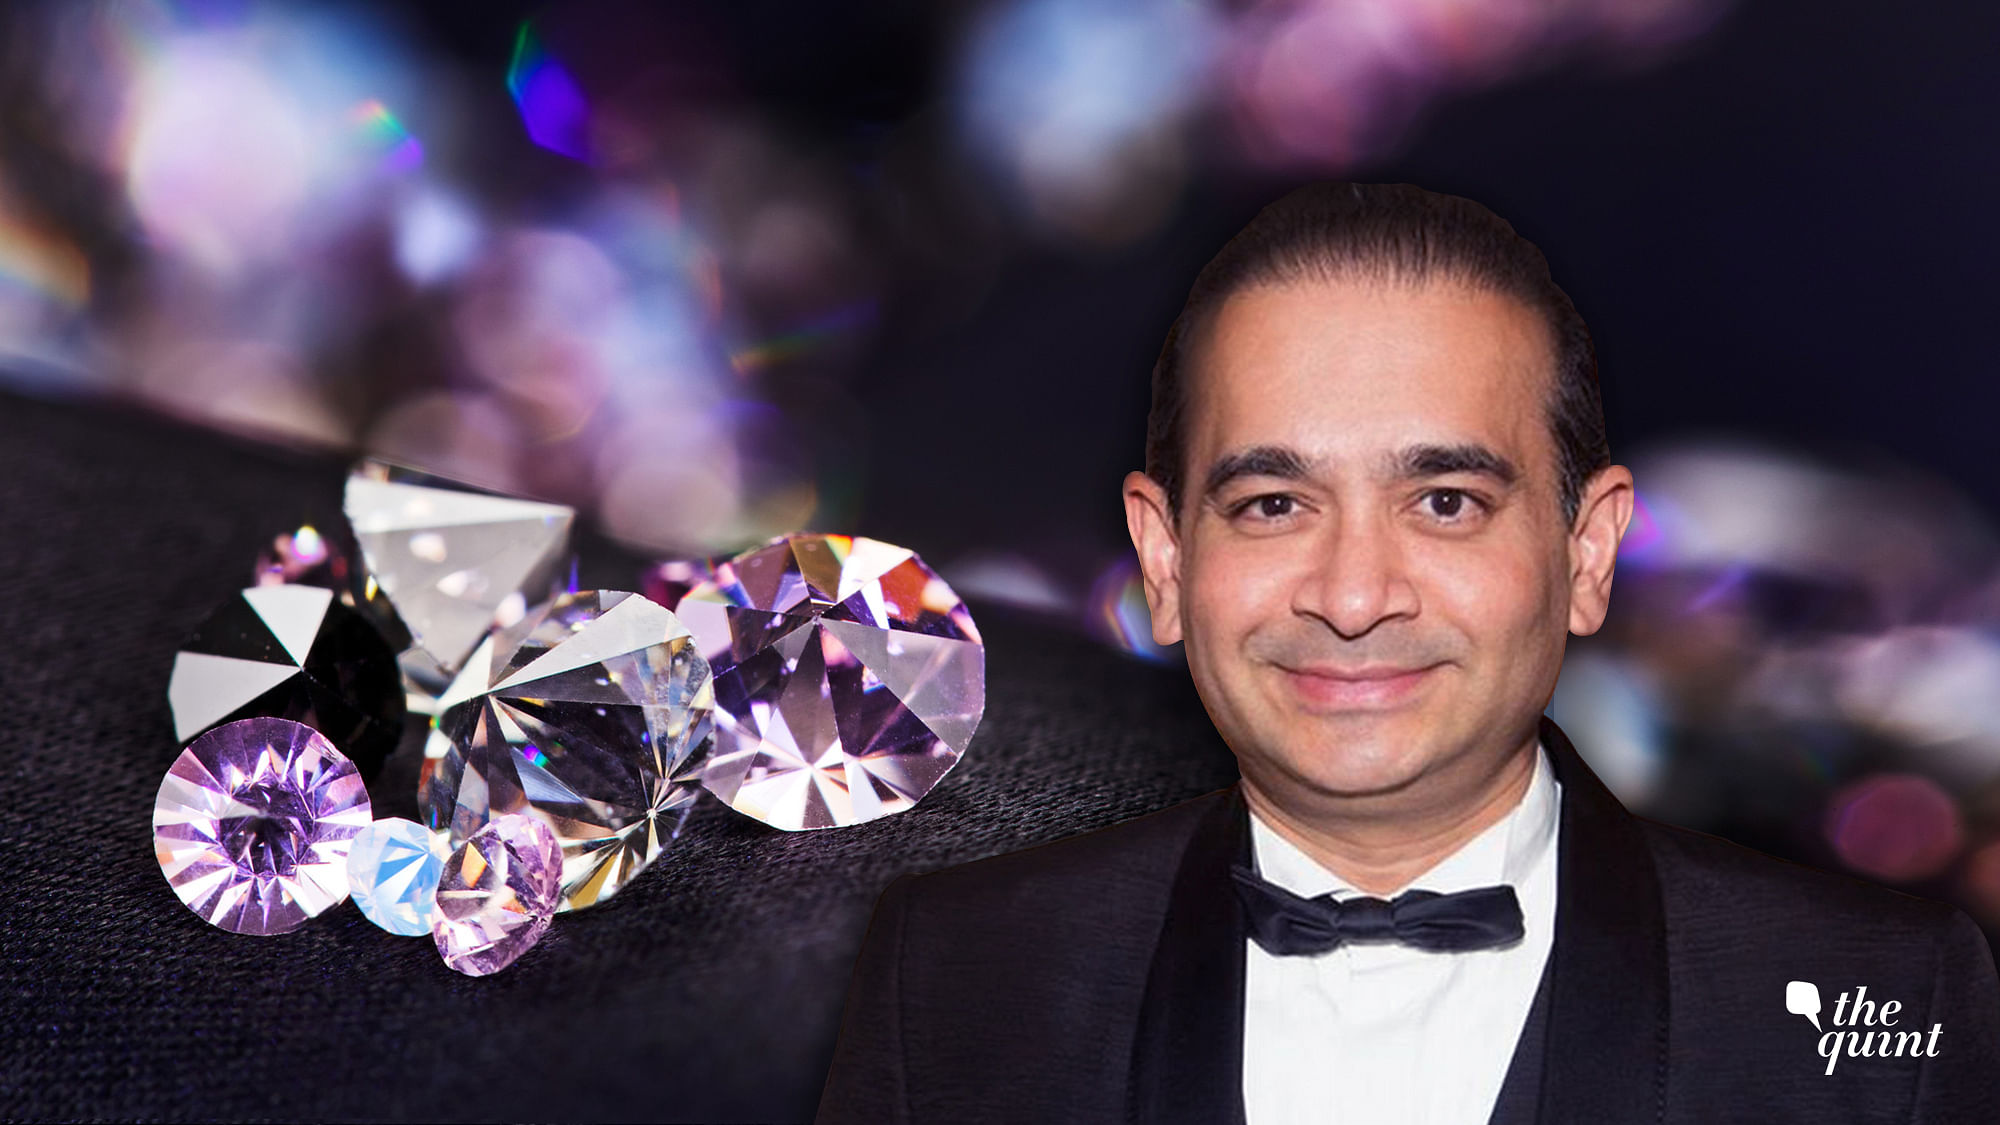 The Debt Recovery Tribunal has directed Nirav Modi and his aides to pay more than Rs 7,200 crore with interest to the defrauded Punjab National Bank.